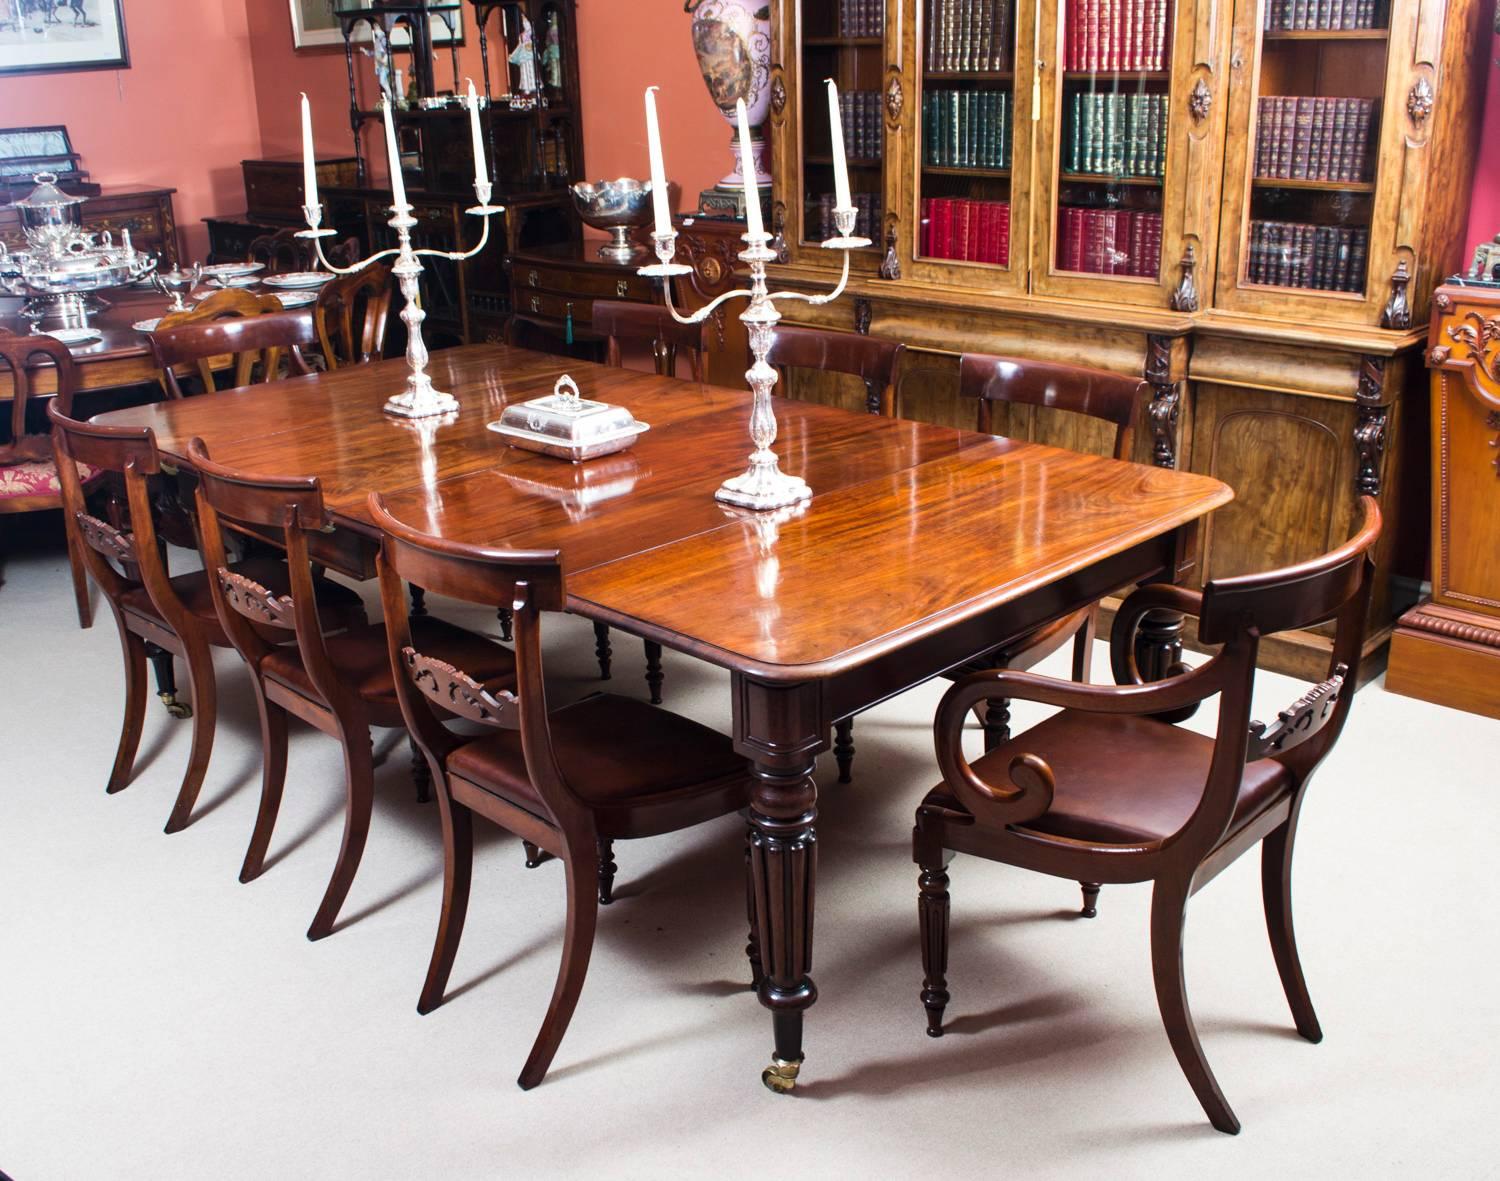 A very rare opportunity to own an antique English Regency dining room table, circa 1820 in date, which can seat eight people in comfort.

The table is made of beautiful solid flame mahogany and has two leaves that can be added or removed as